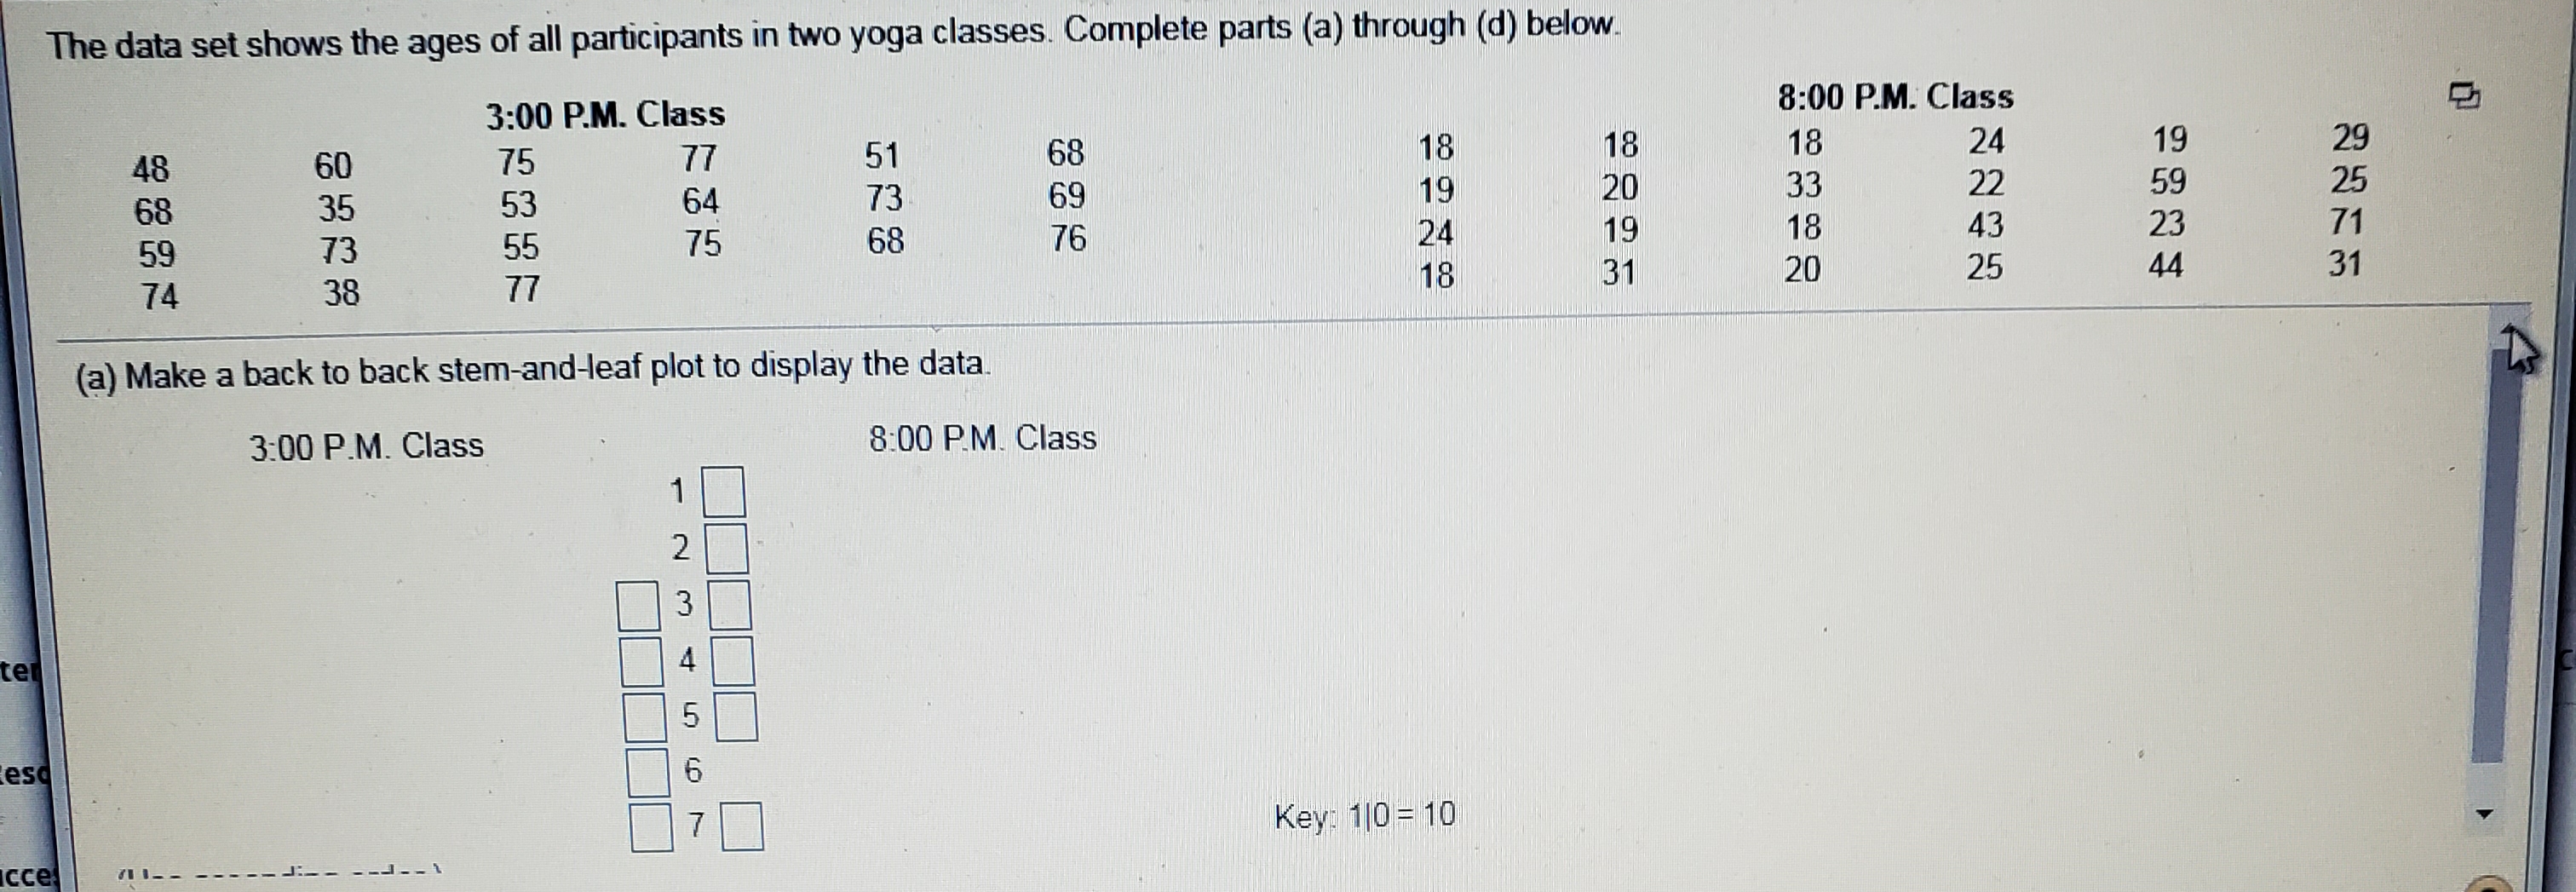 The data set shows the ages of all participants in two yoga classes. Complete parts (a) through (d) below.
8:00 P.M. Class
3:00 P.M. Class
77
19
24
18
18
18
68
75
60
25
59
22
33
20
19
69
73
64
53
35
68
71
23
43
18
19
24
76
68
75
55
73
59
31
44
25
20
31
18
77
38
74
(a) Make a back to back stem-and-leaf plot to display the data.
8:00 P.M. Class
3:00 P.M. Class
1
2
3
te
5
6
esc
Key: 10 10
7
cce
1--
4t
